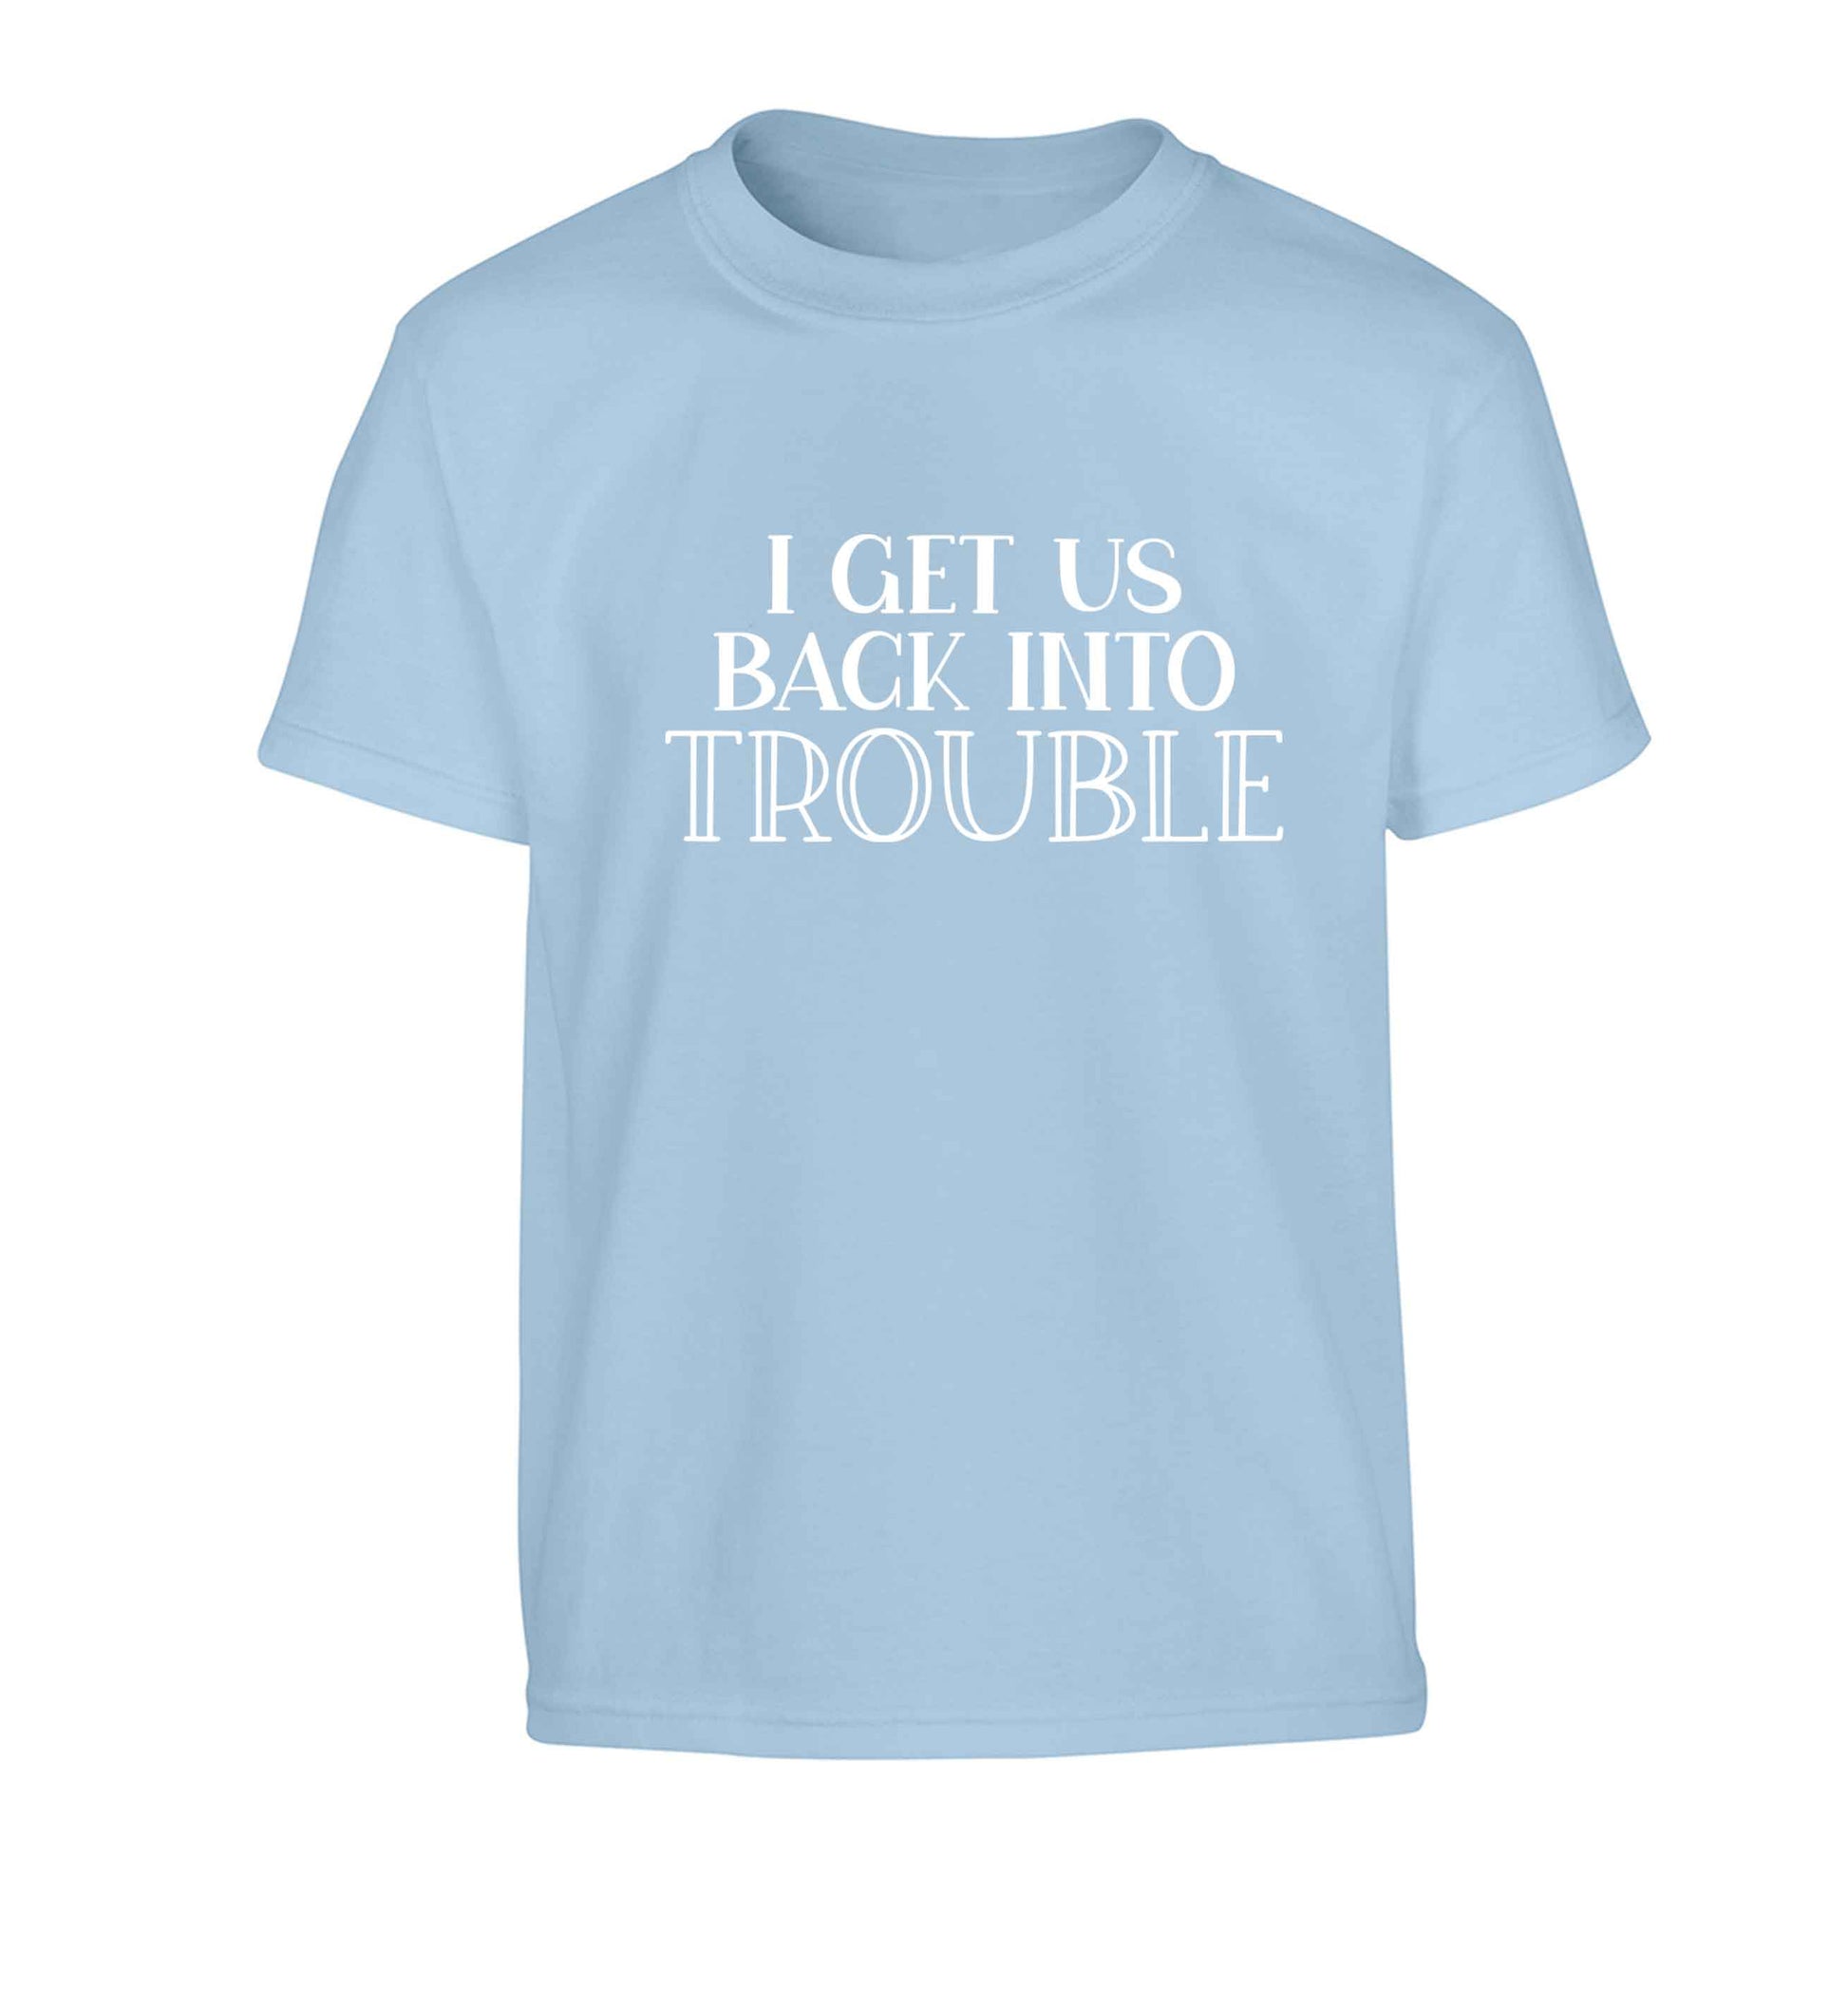 I get us back into trouble Children's light blue Tshirt 12-13 Years